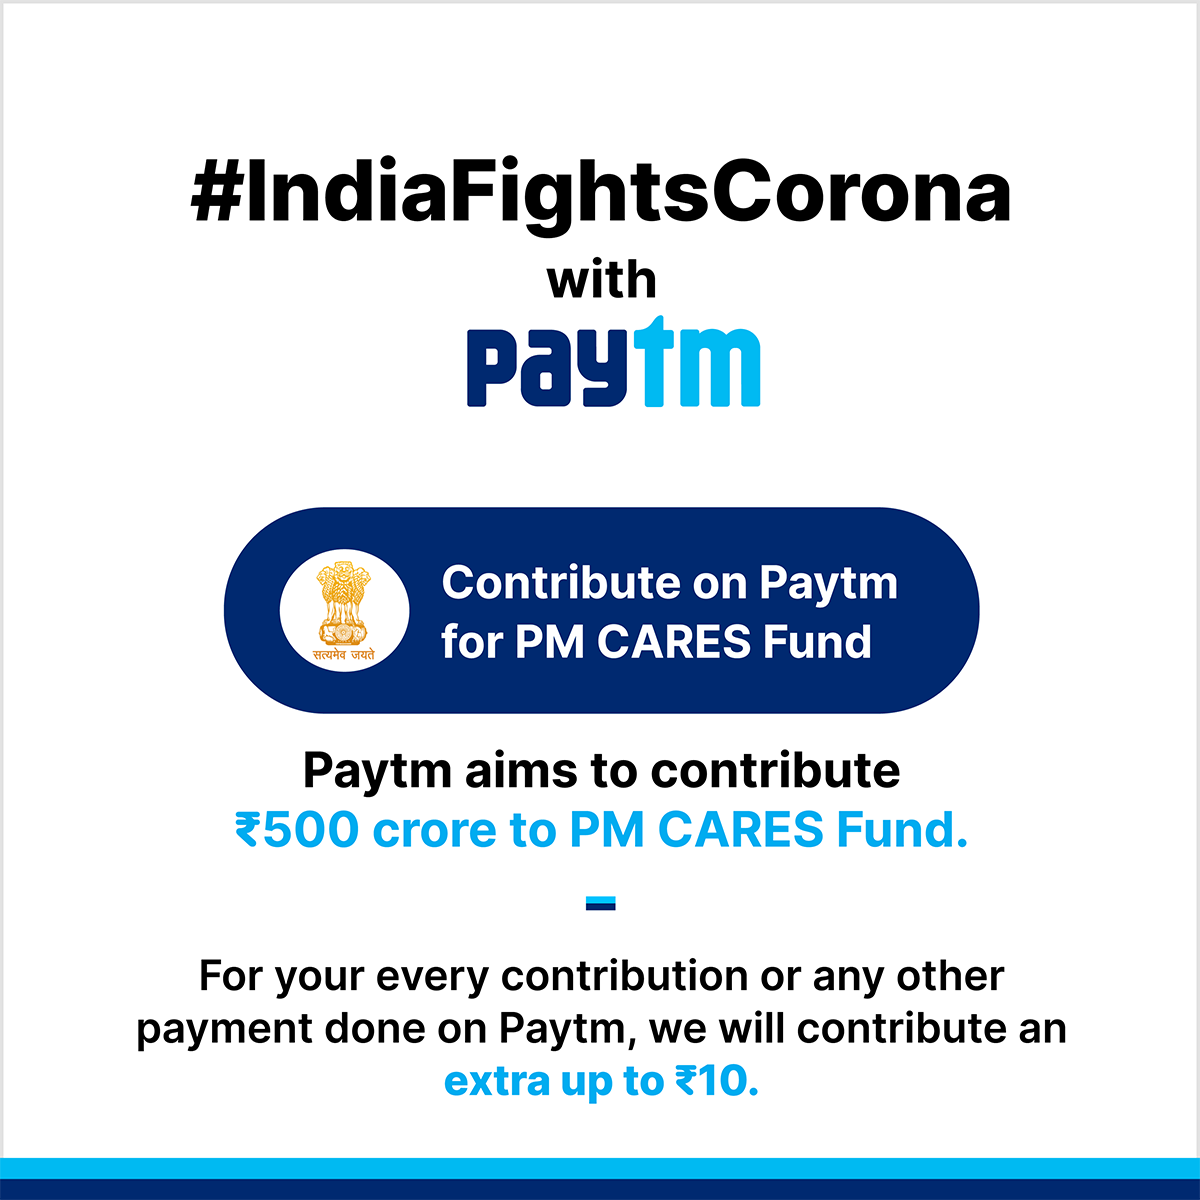 paytms-feed-my-city-initiative-serves-over-10-lakh-meals-to-daily-wagers-contributions-cross-rs-2-crore